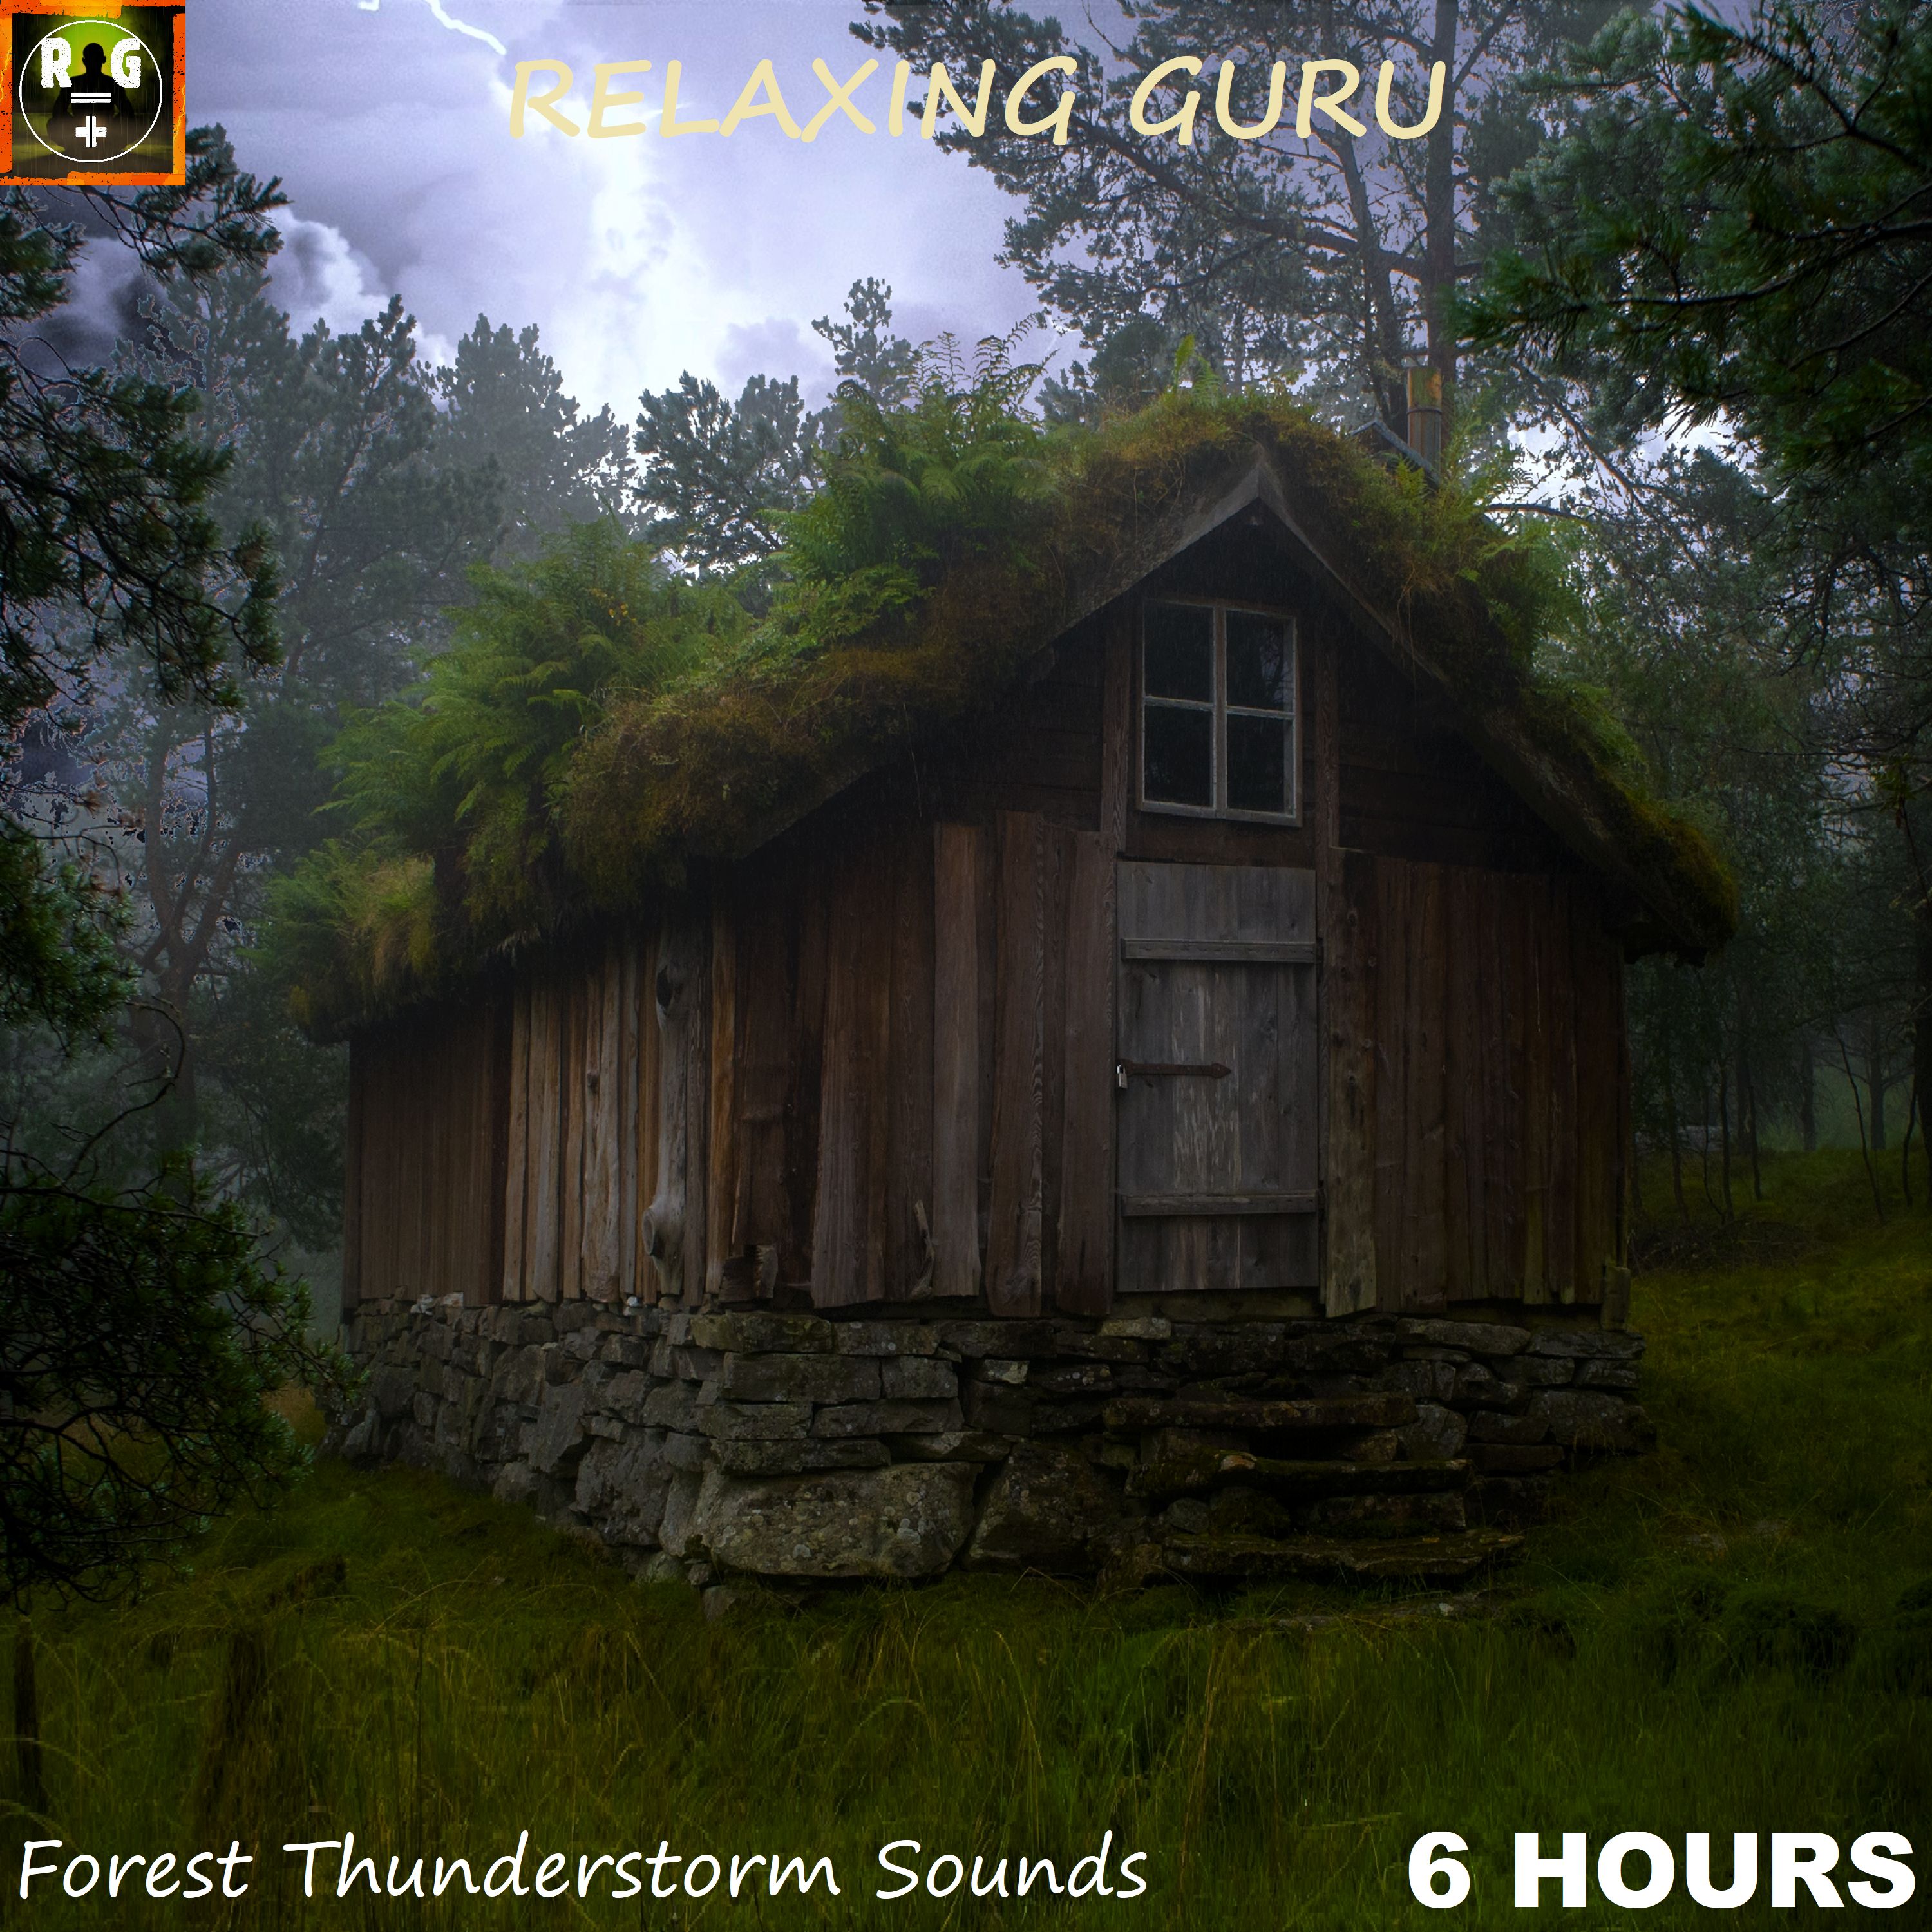 Budata Relaxing Rain & Thunder on a Wooden Hut deep in the Forest - Thunderstorm Sounds for Sleep (6 HOURS)